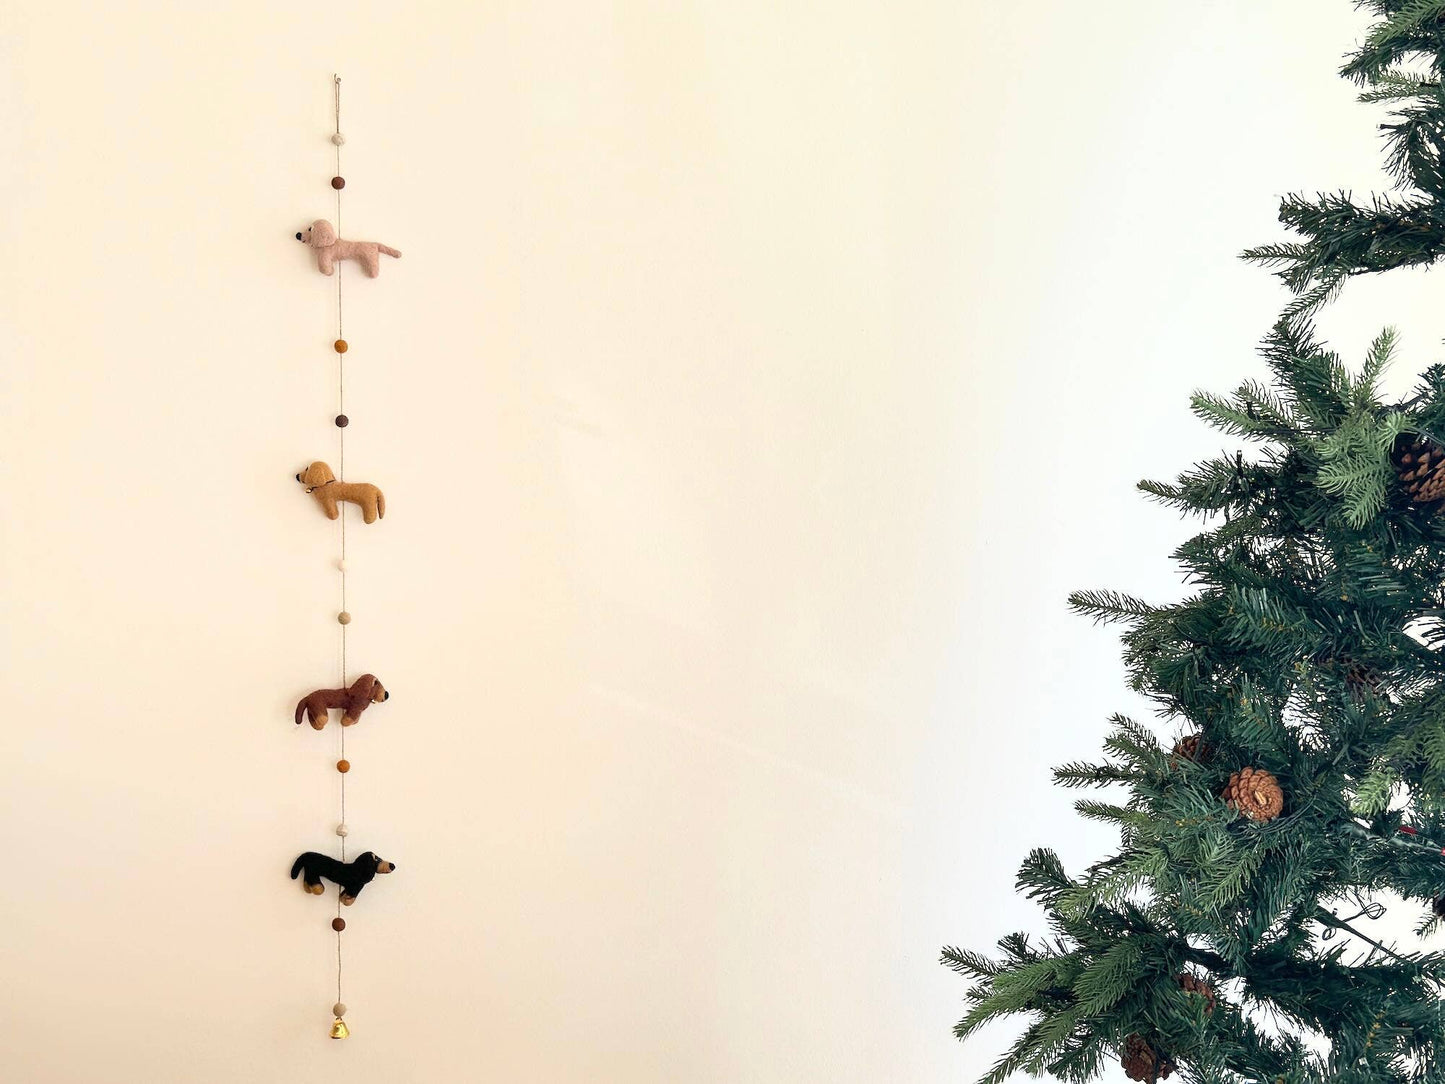 Felted hanging garland with four dachshund dogs